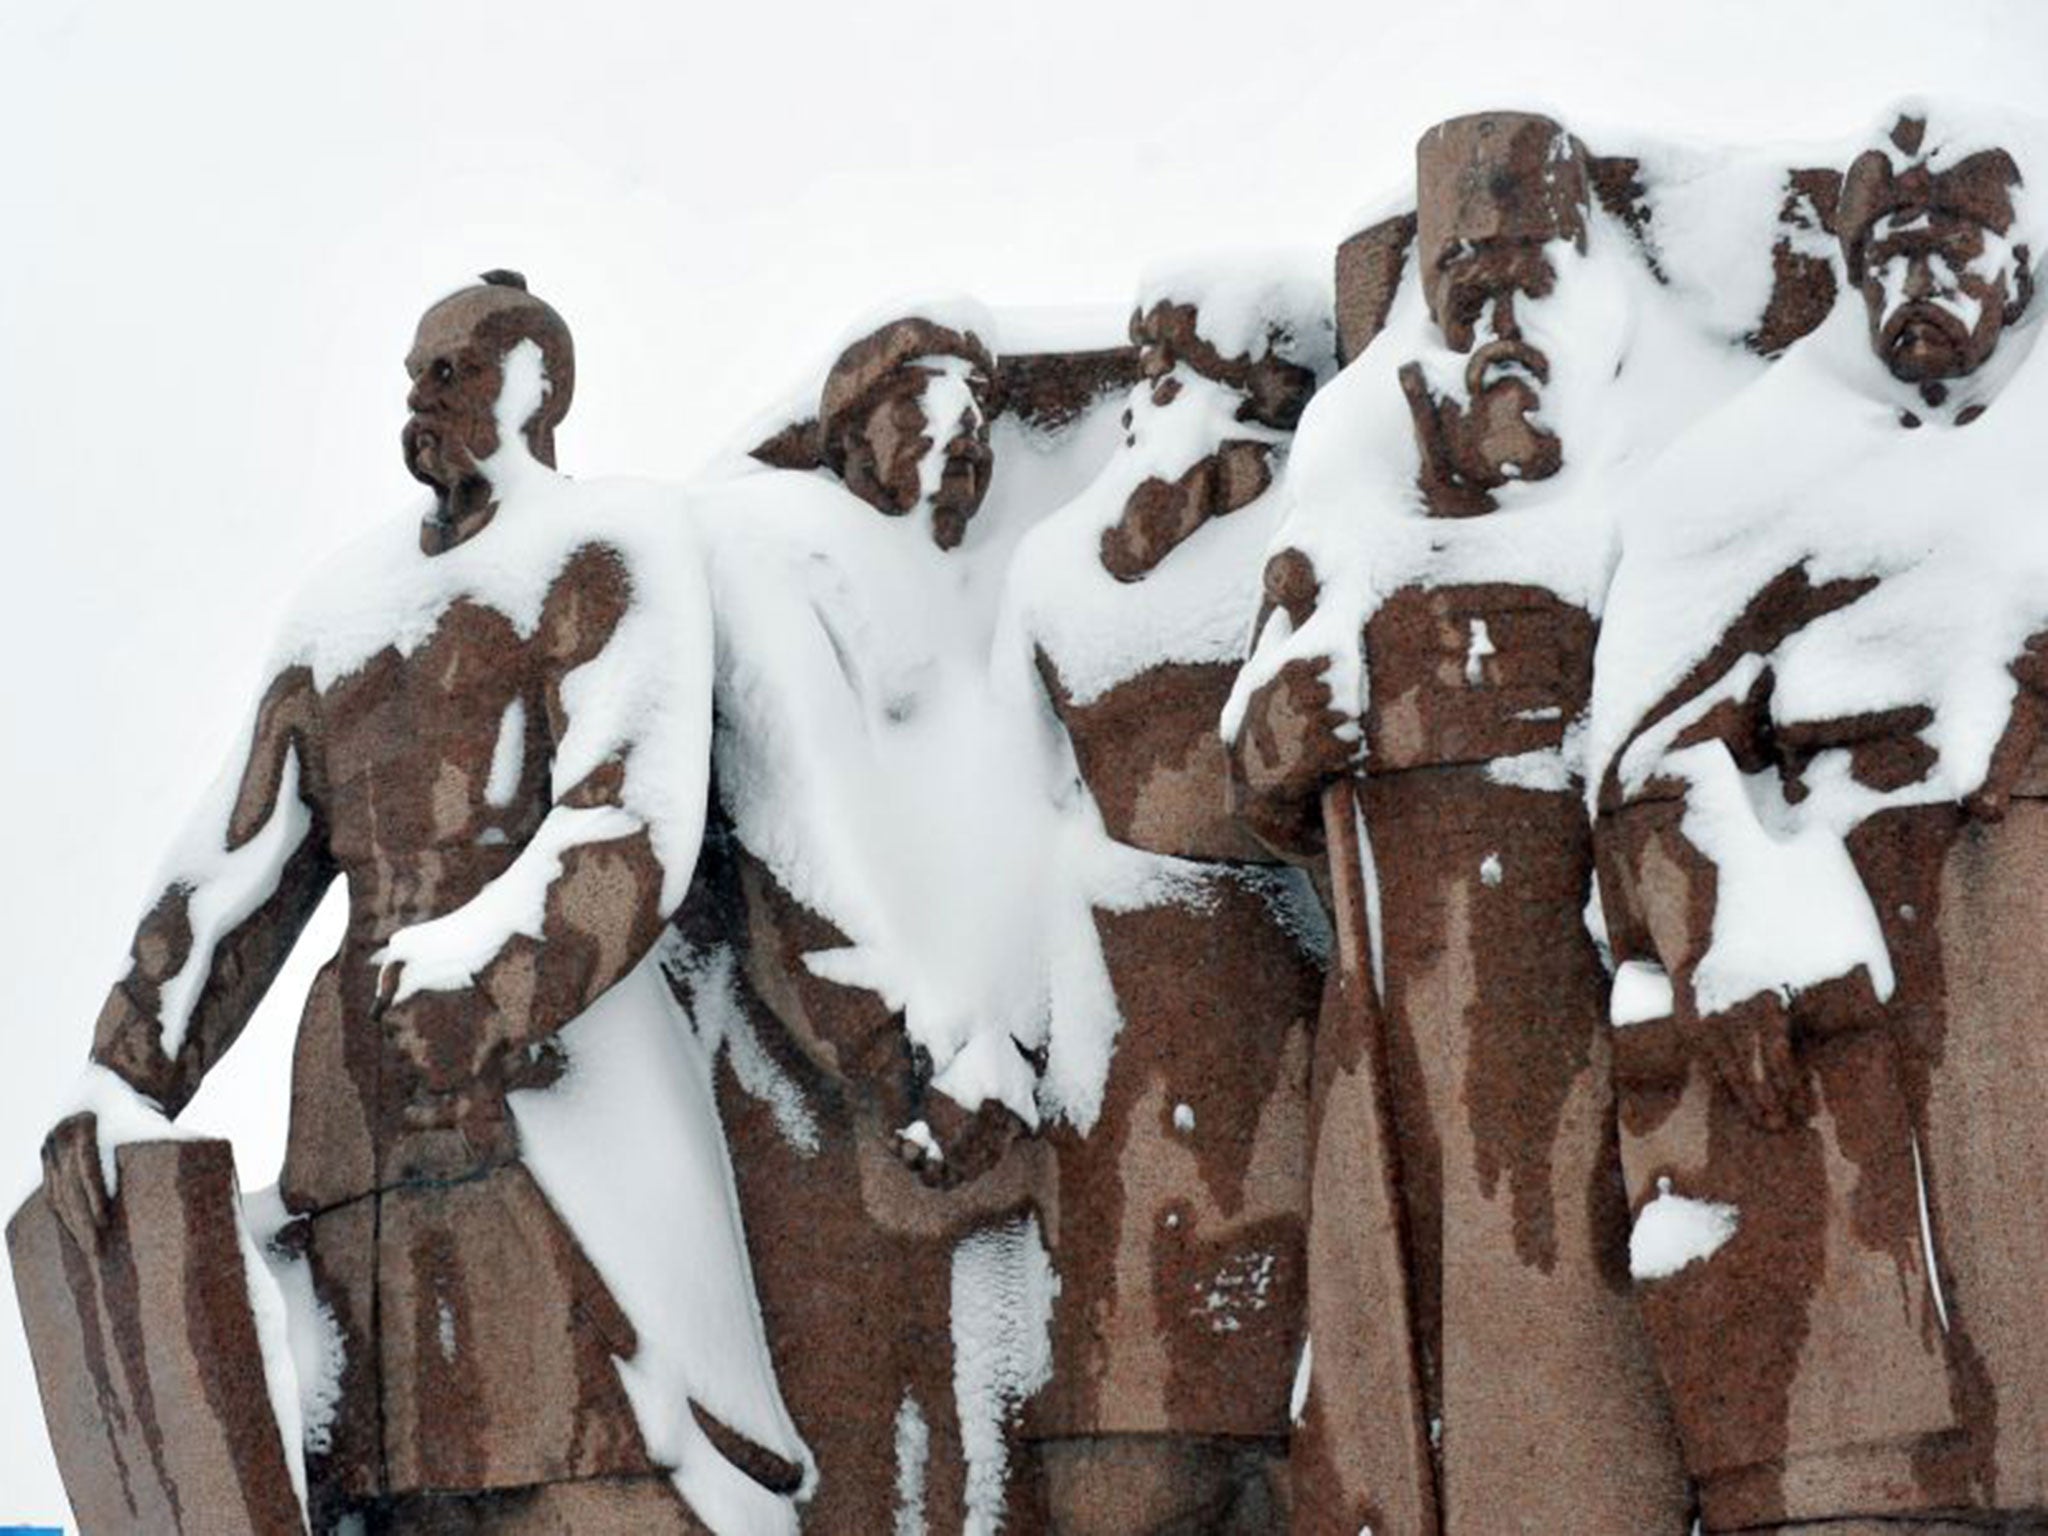 A Soviet-era monument to Ukrainian- Russian co-operation in Kiev, which is facing a difficult winter this year